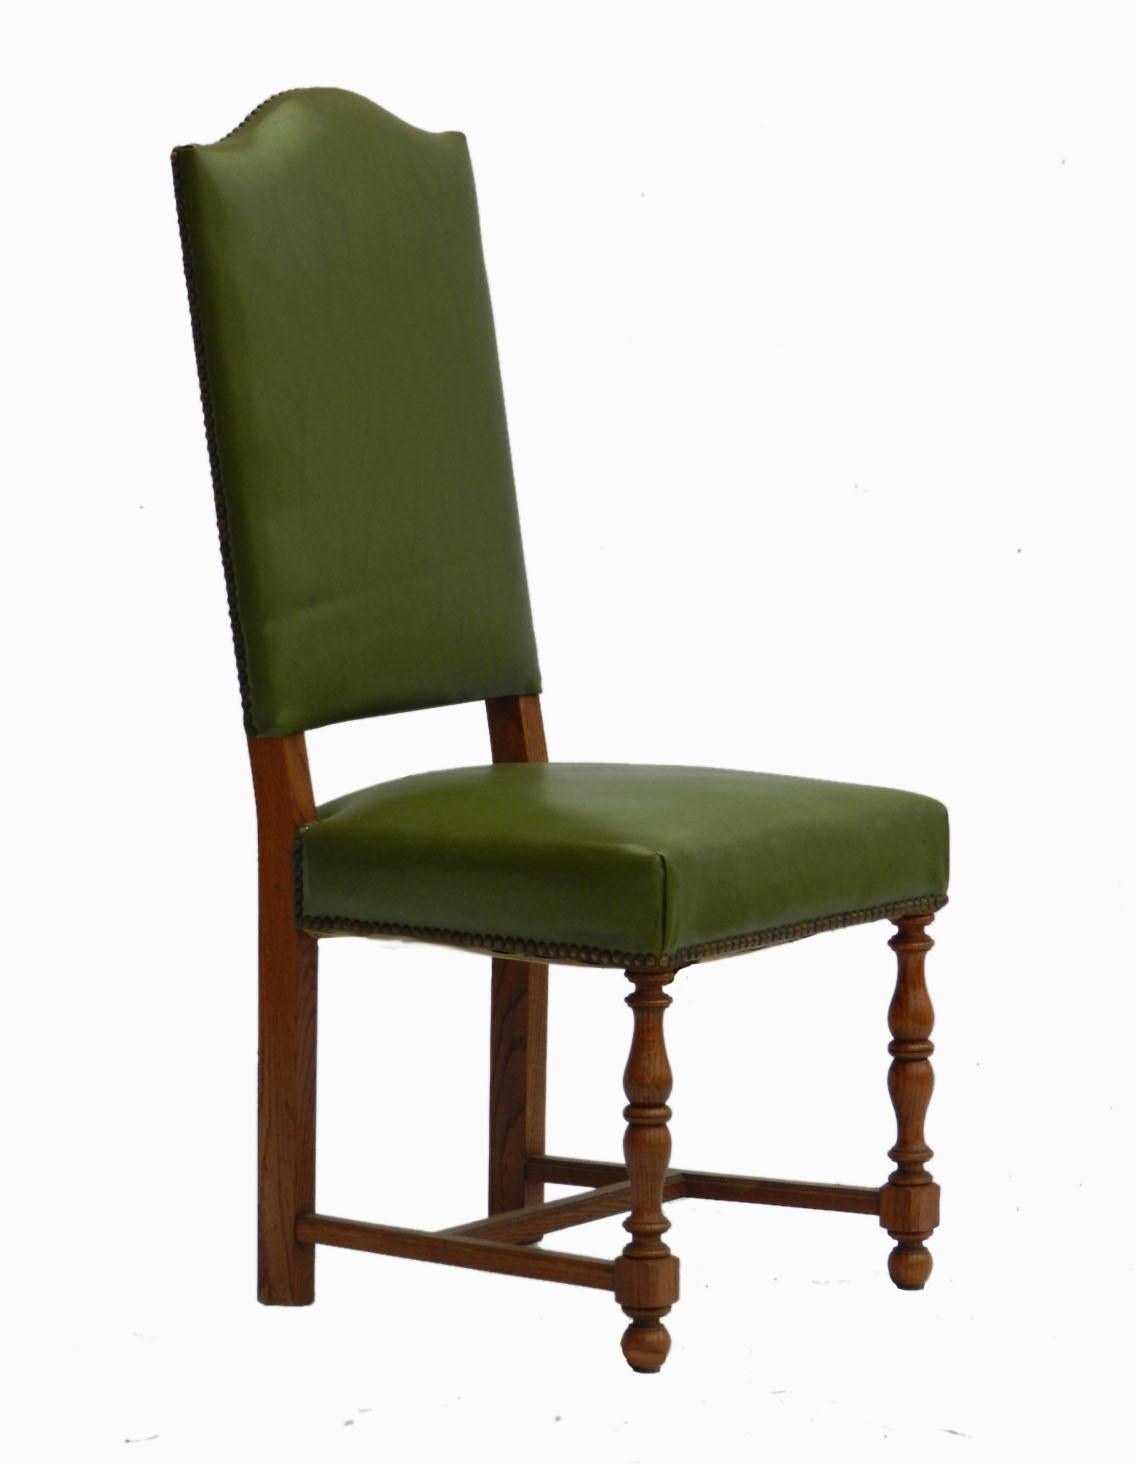 Six French dining chairs, circa 1920
Price includes recovering excludes cost of fabric or leather
Upholstered
High backs
Very comfortable
Turned oak legs we can customize the wood to your specifications
Sound and solid.

 